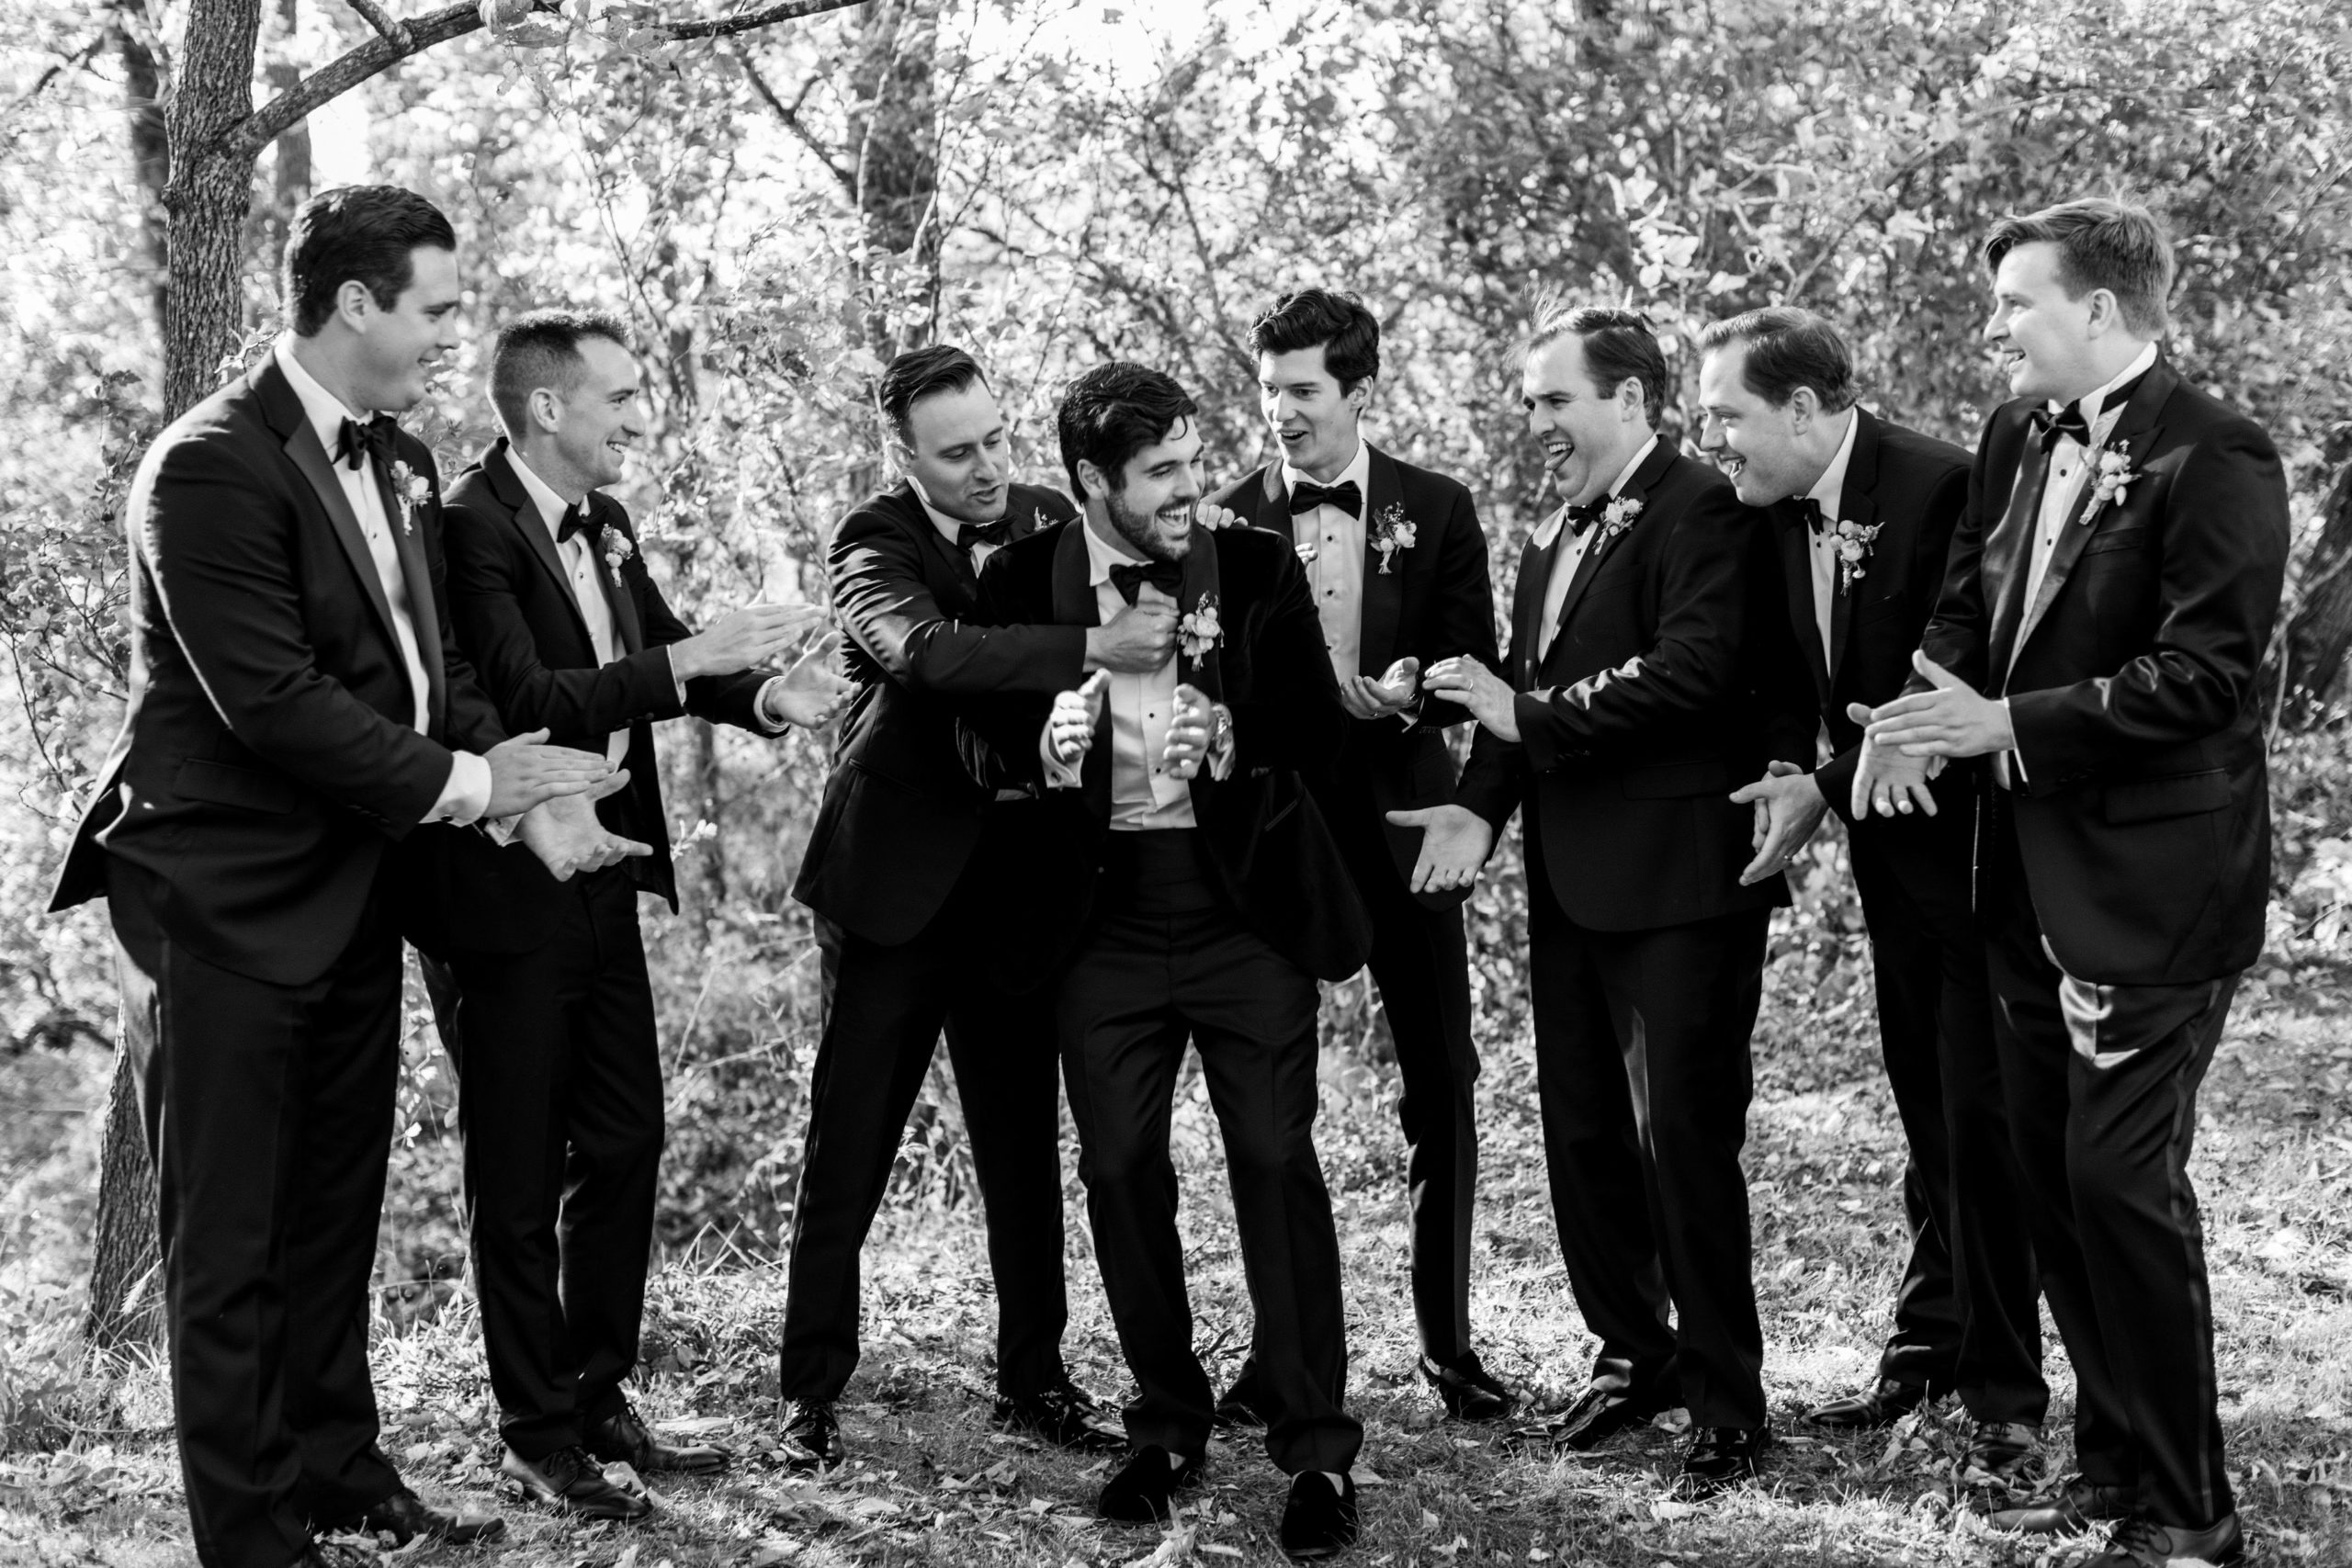 Groom and groomsmen laugh and smile outside in black tuxedos for Clifton wedding photography